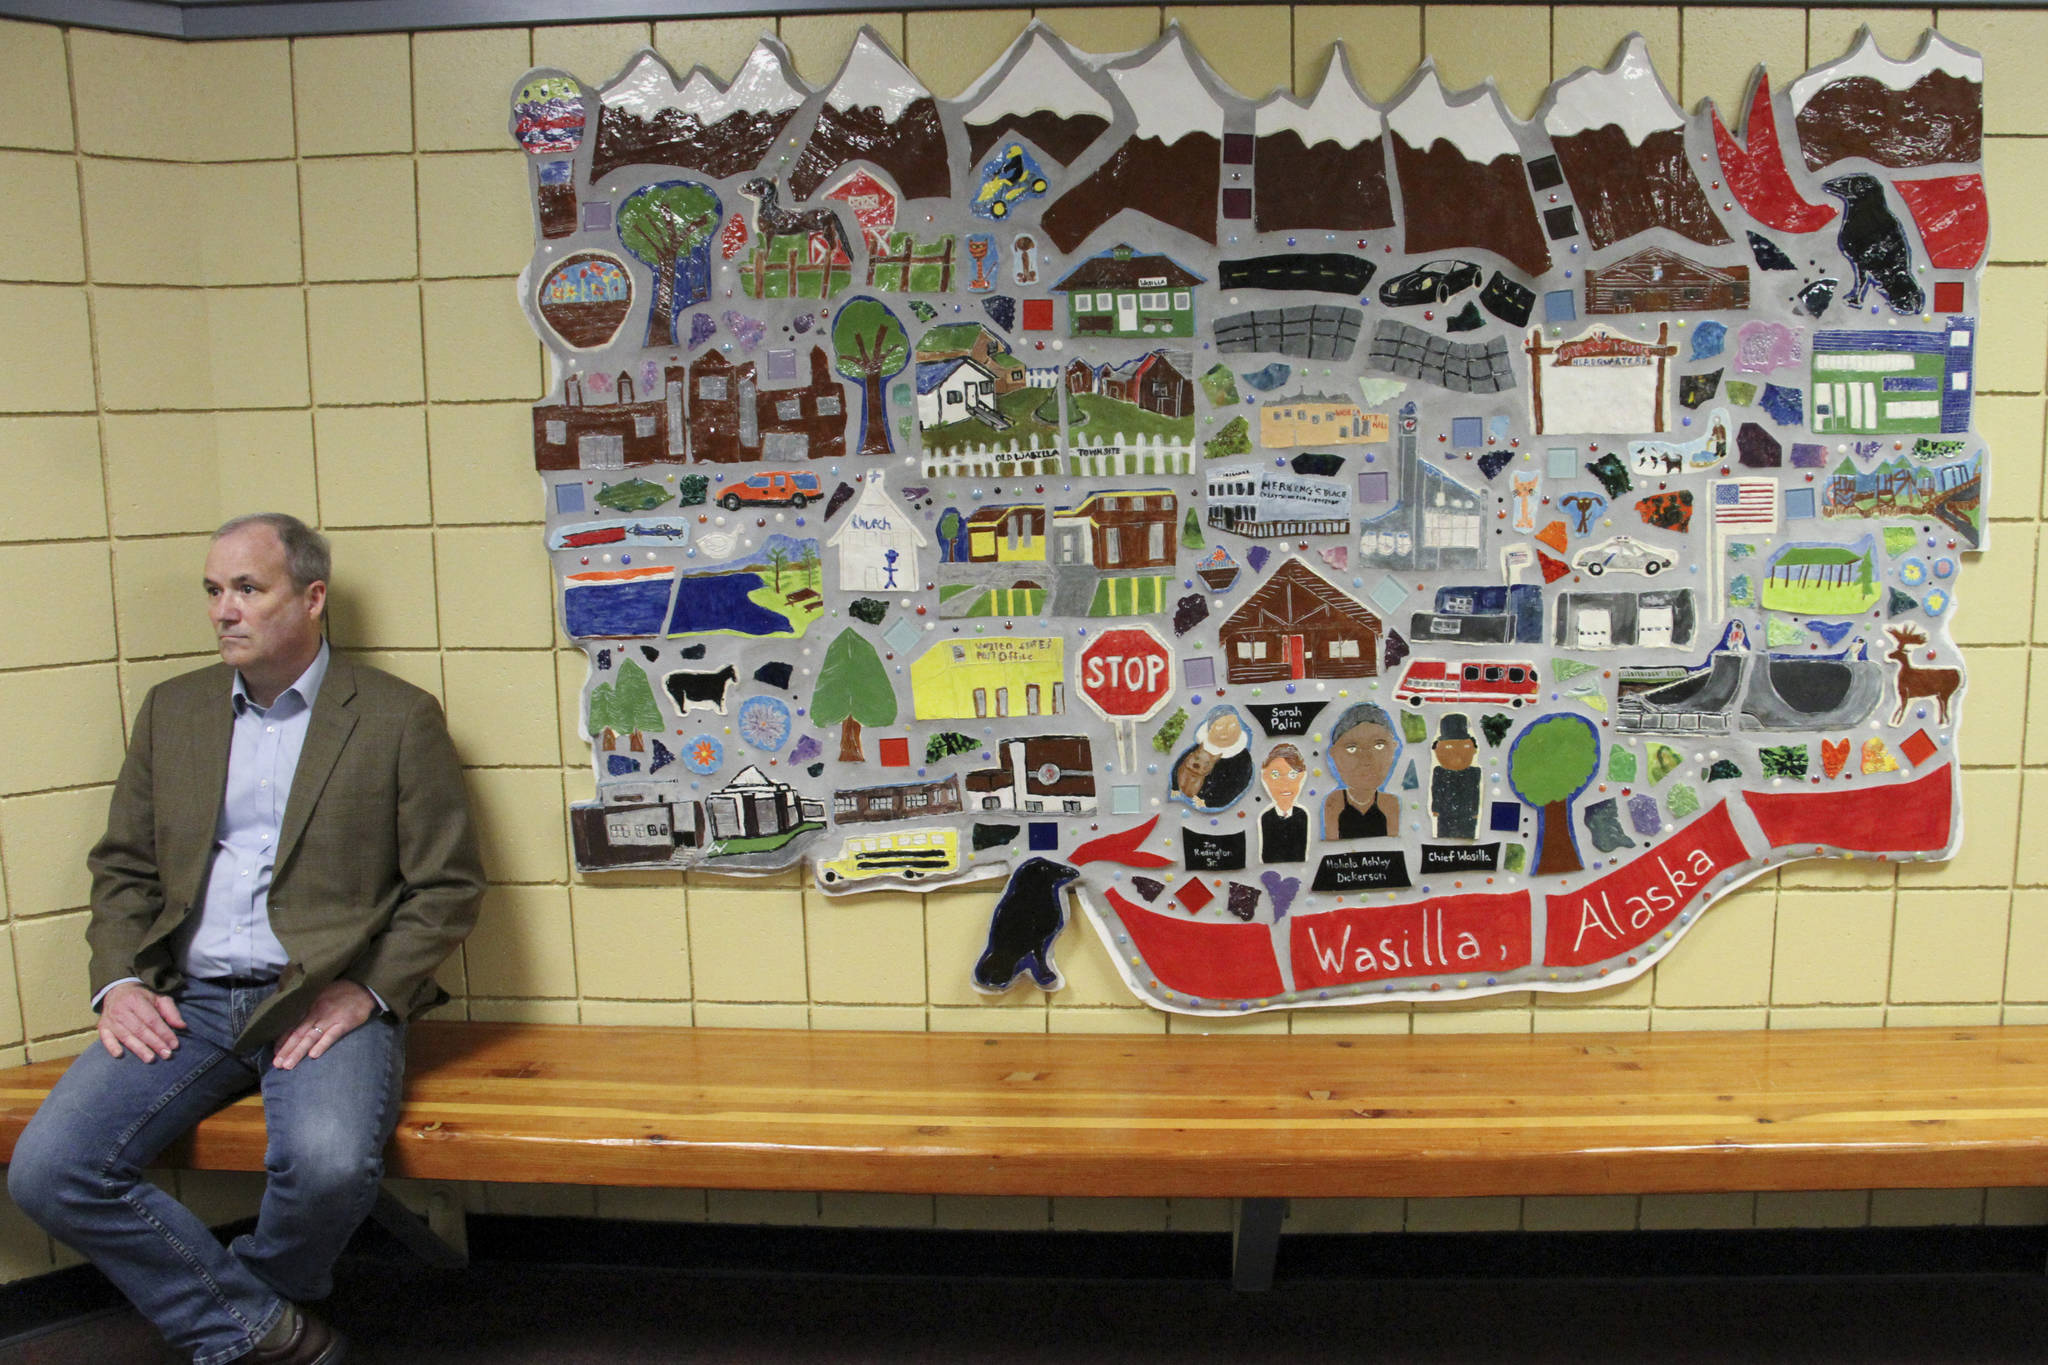 This June 14, 2019, photo shows Jeff Turner, the deputy communications director for Alaska Gov. Mike Dunleavy, sitting next to artwork displayed at Wasilla Middle School in Wasilla, Alaska. Dunleavy has called lawmakers into special session in Wasilla beginning July 8, but some lawmakers have expressed concerns over security and logistics with the location more than 500 miles from the state capital of Juneau, Alaska. (AP Photo/Mark Thiessen)